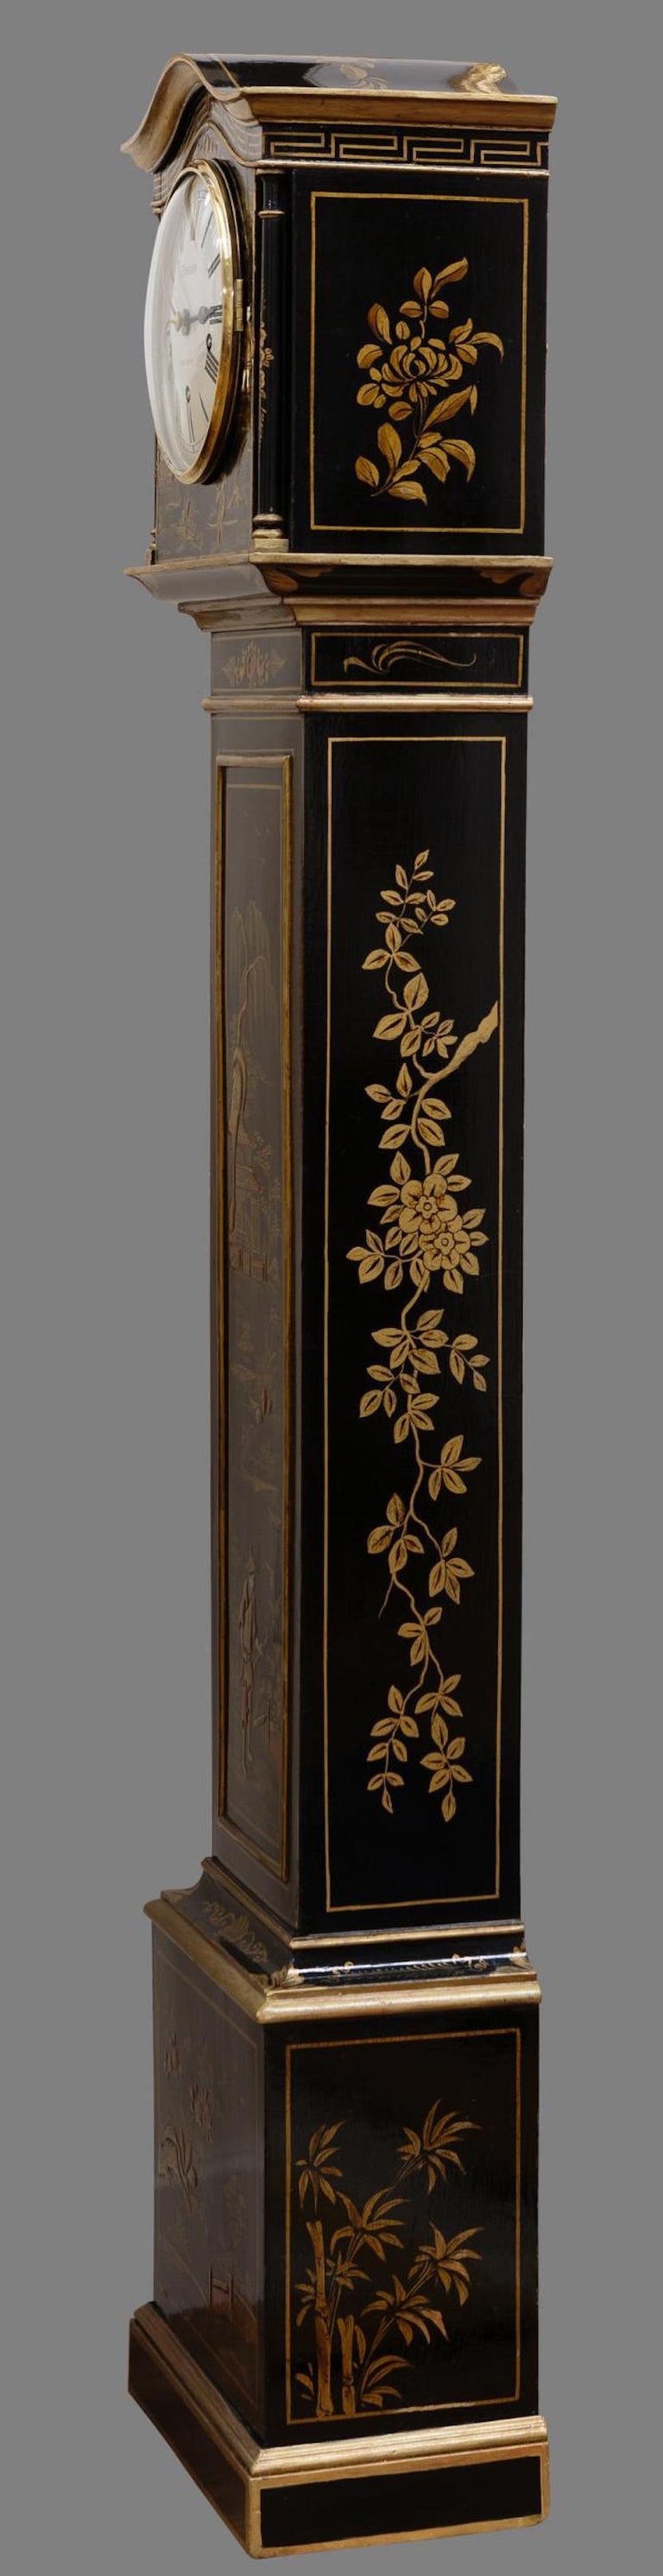 Miniature Longcase clock

Miniature Longcase clock standing on a stepped base and surmounted by a moulded shaped arch with fine raised Chinoiserie decoration on an ebonised ground. The case featuring typical Chinese country scenes with forests,